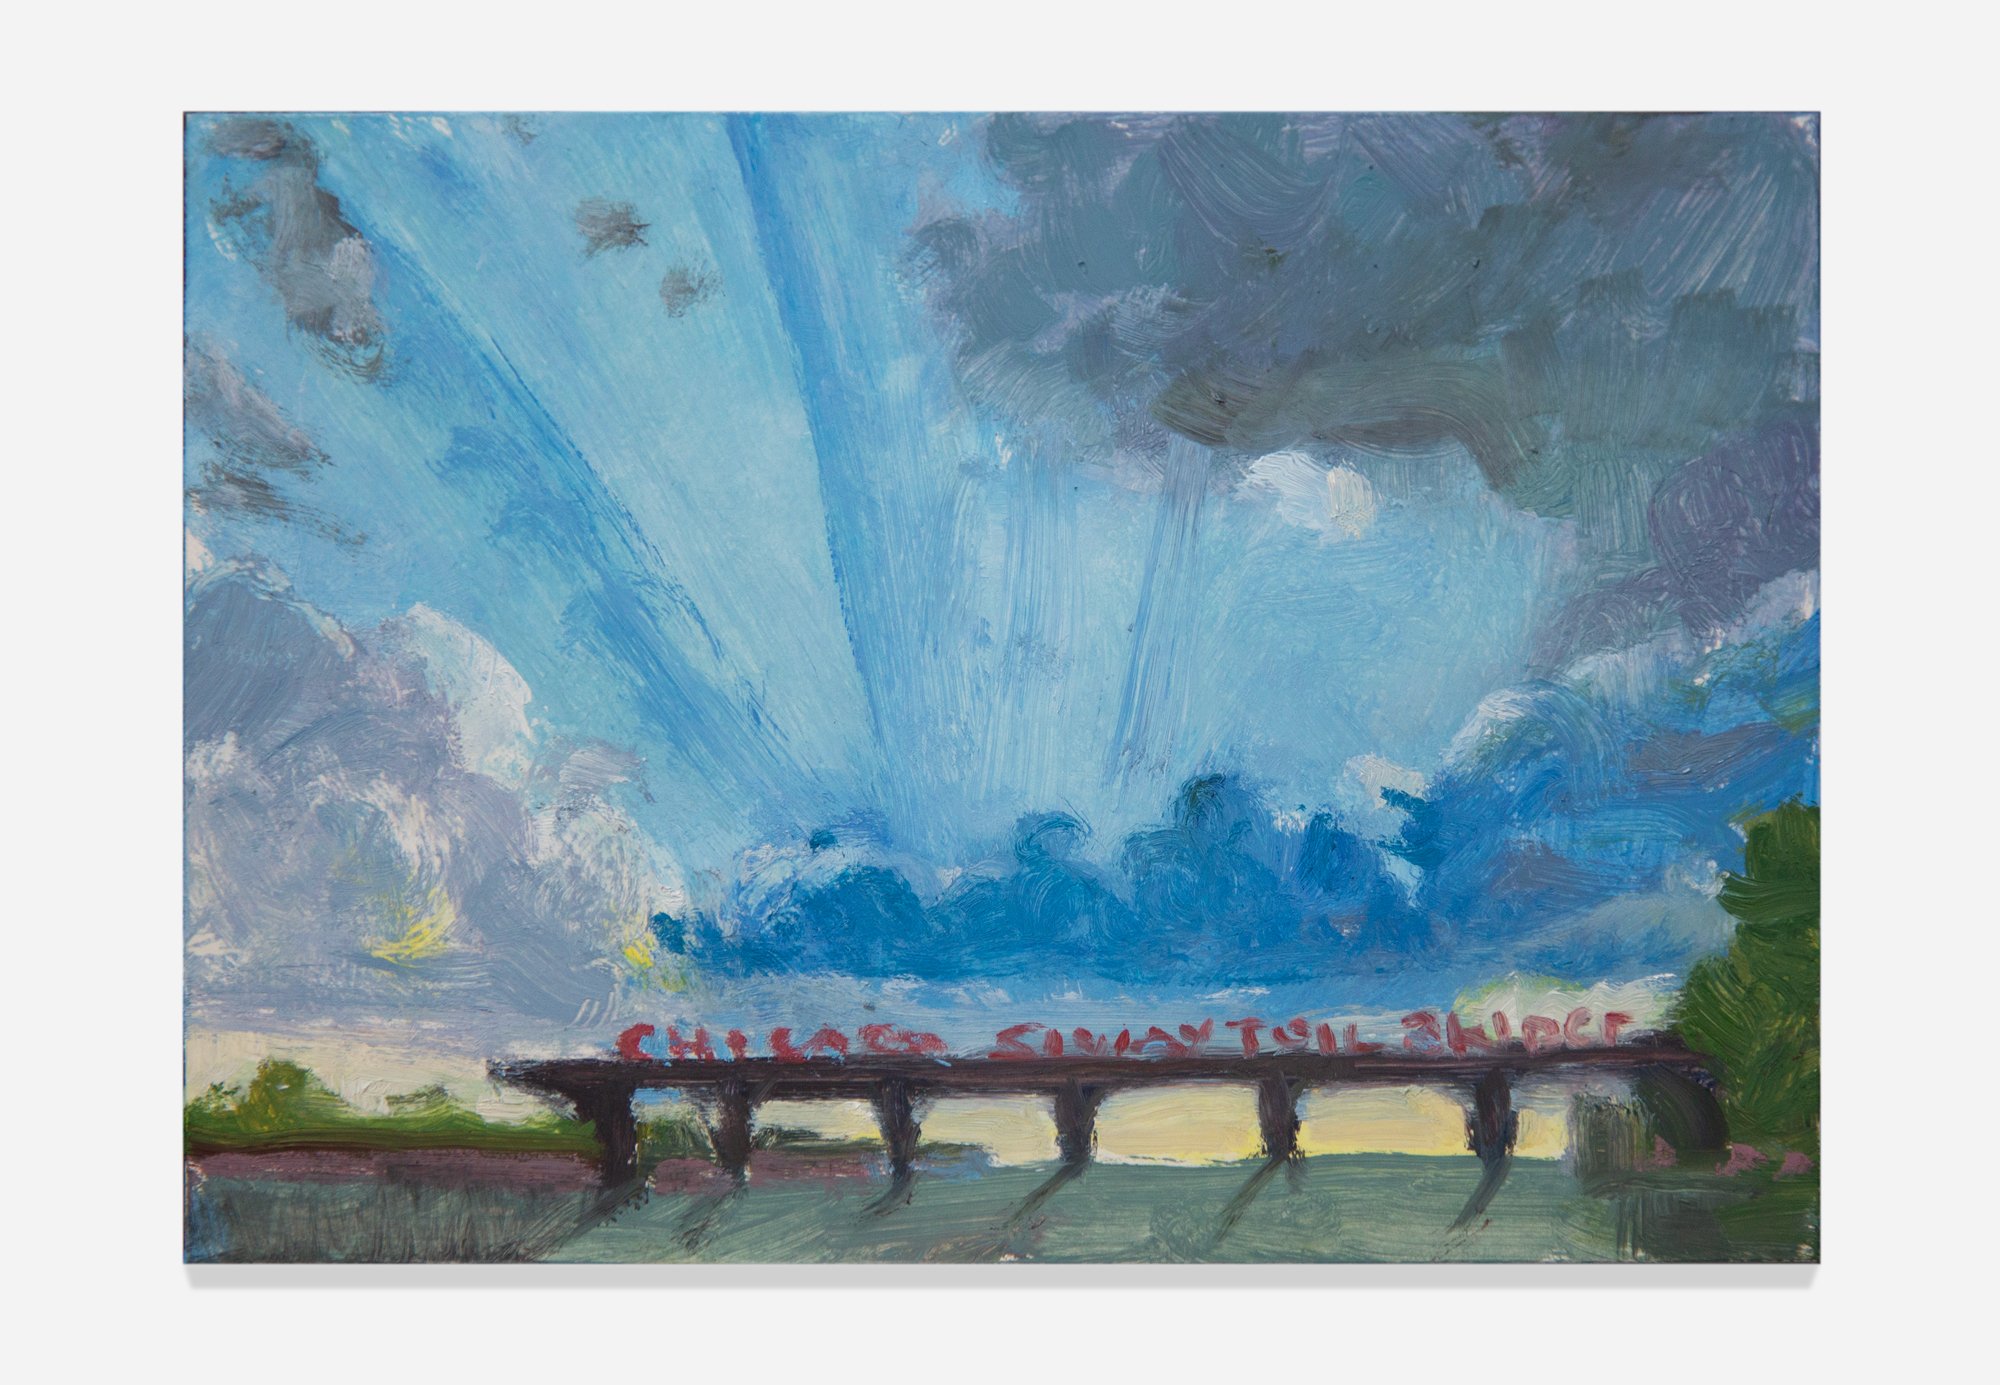     Chicago Skyway (Sky Series) , 2021, Oil on clay coated panel, 5 x 7”     